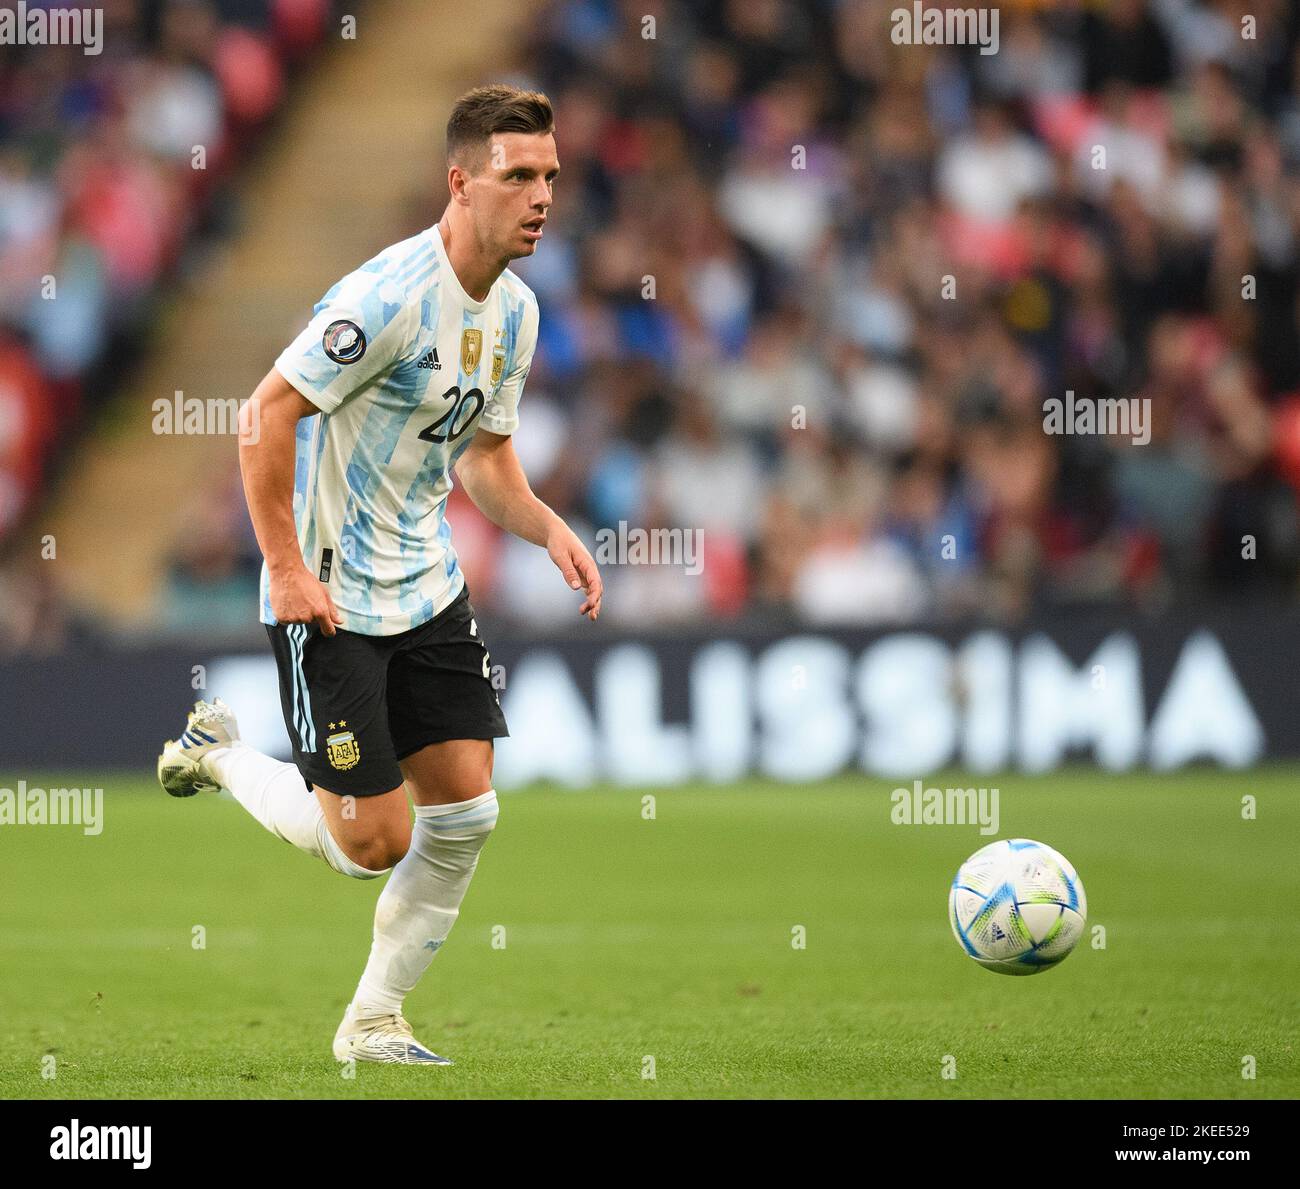 01 Jun 2022 - Italy v Argentina - Finalissima 2022 - Wembley Stadium  Argentina's Giovani Lo Celso during the match against Italy at Wembley Stadium. Picture Credit : © Mark Pain / Alamy Stock Photo